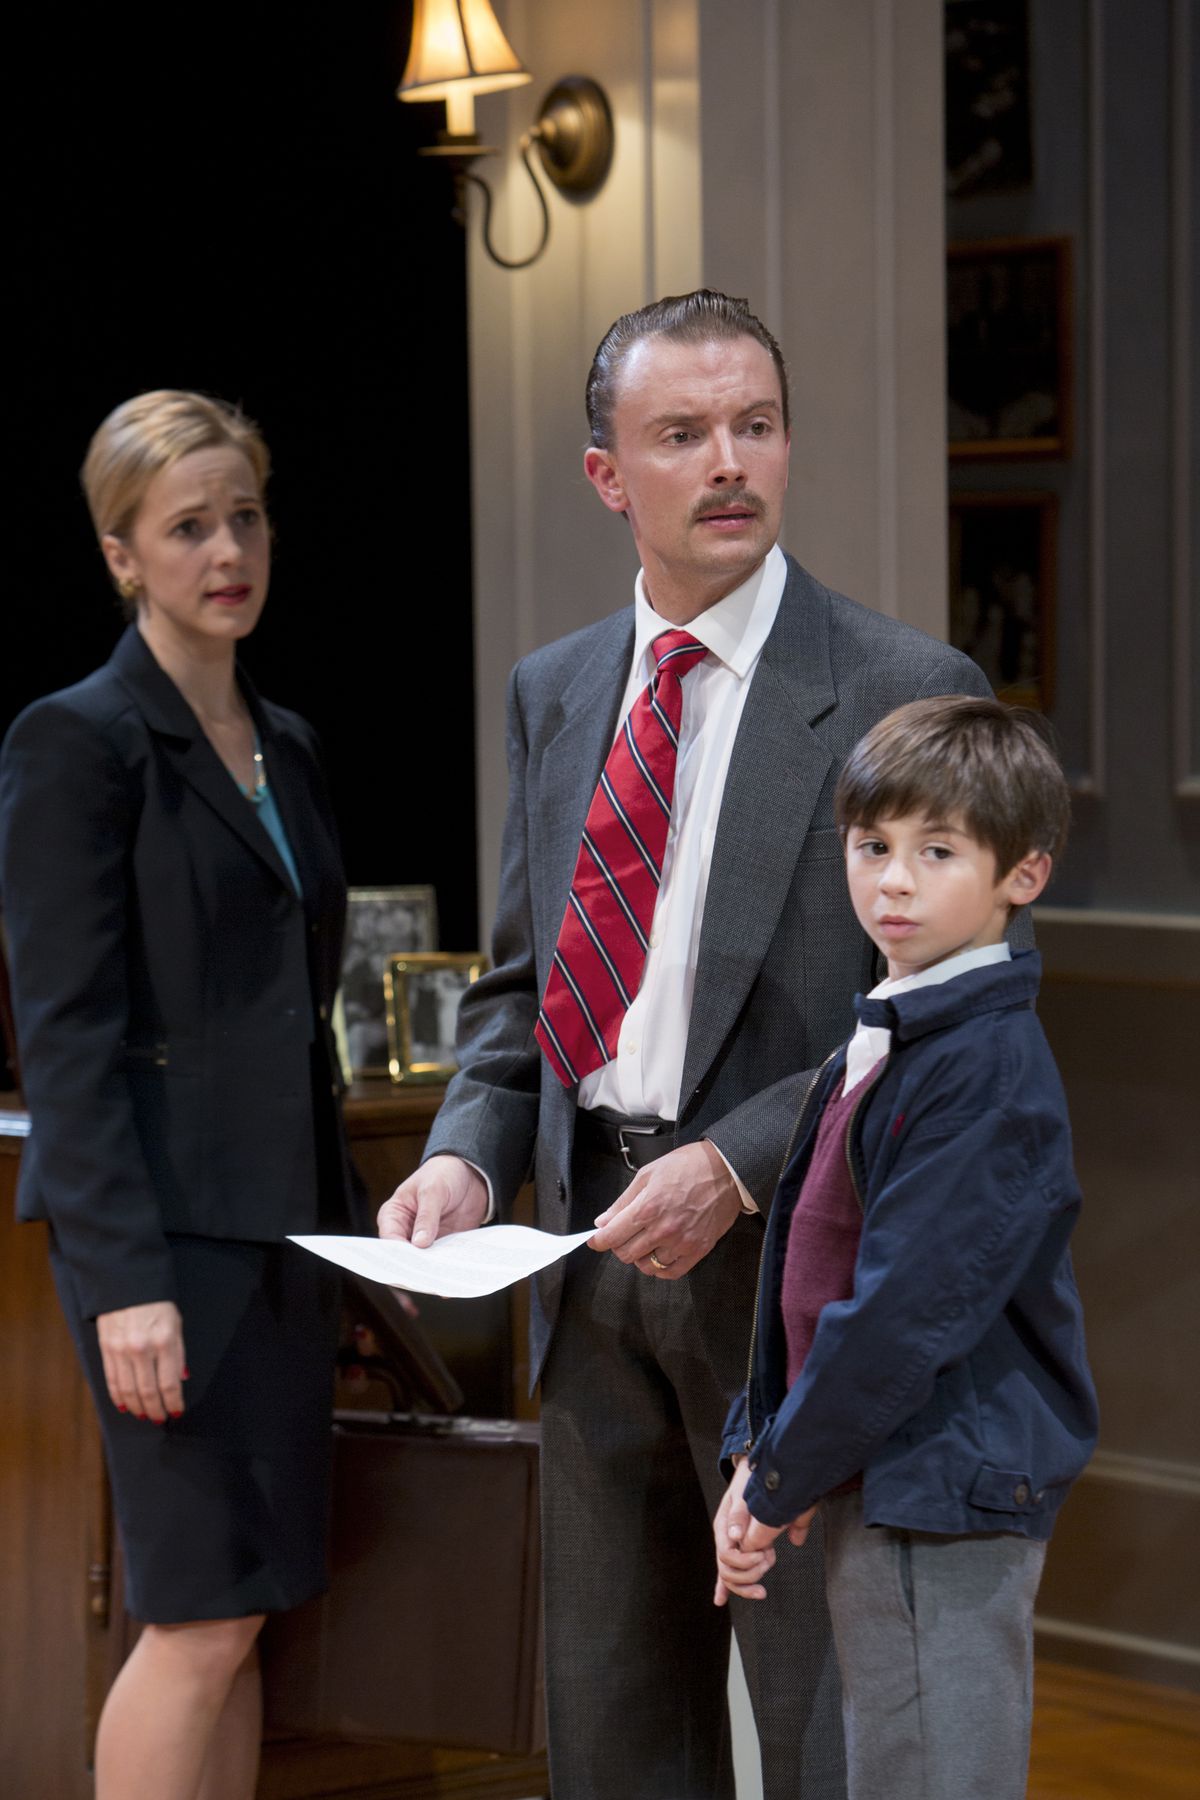 Mattie Hawkinson (from left), Greg Matthew Anderson and Tyler Kaplan in “The City of Conversation” at Northlight Theatre. (Photo: Charles Osgood)